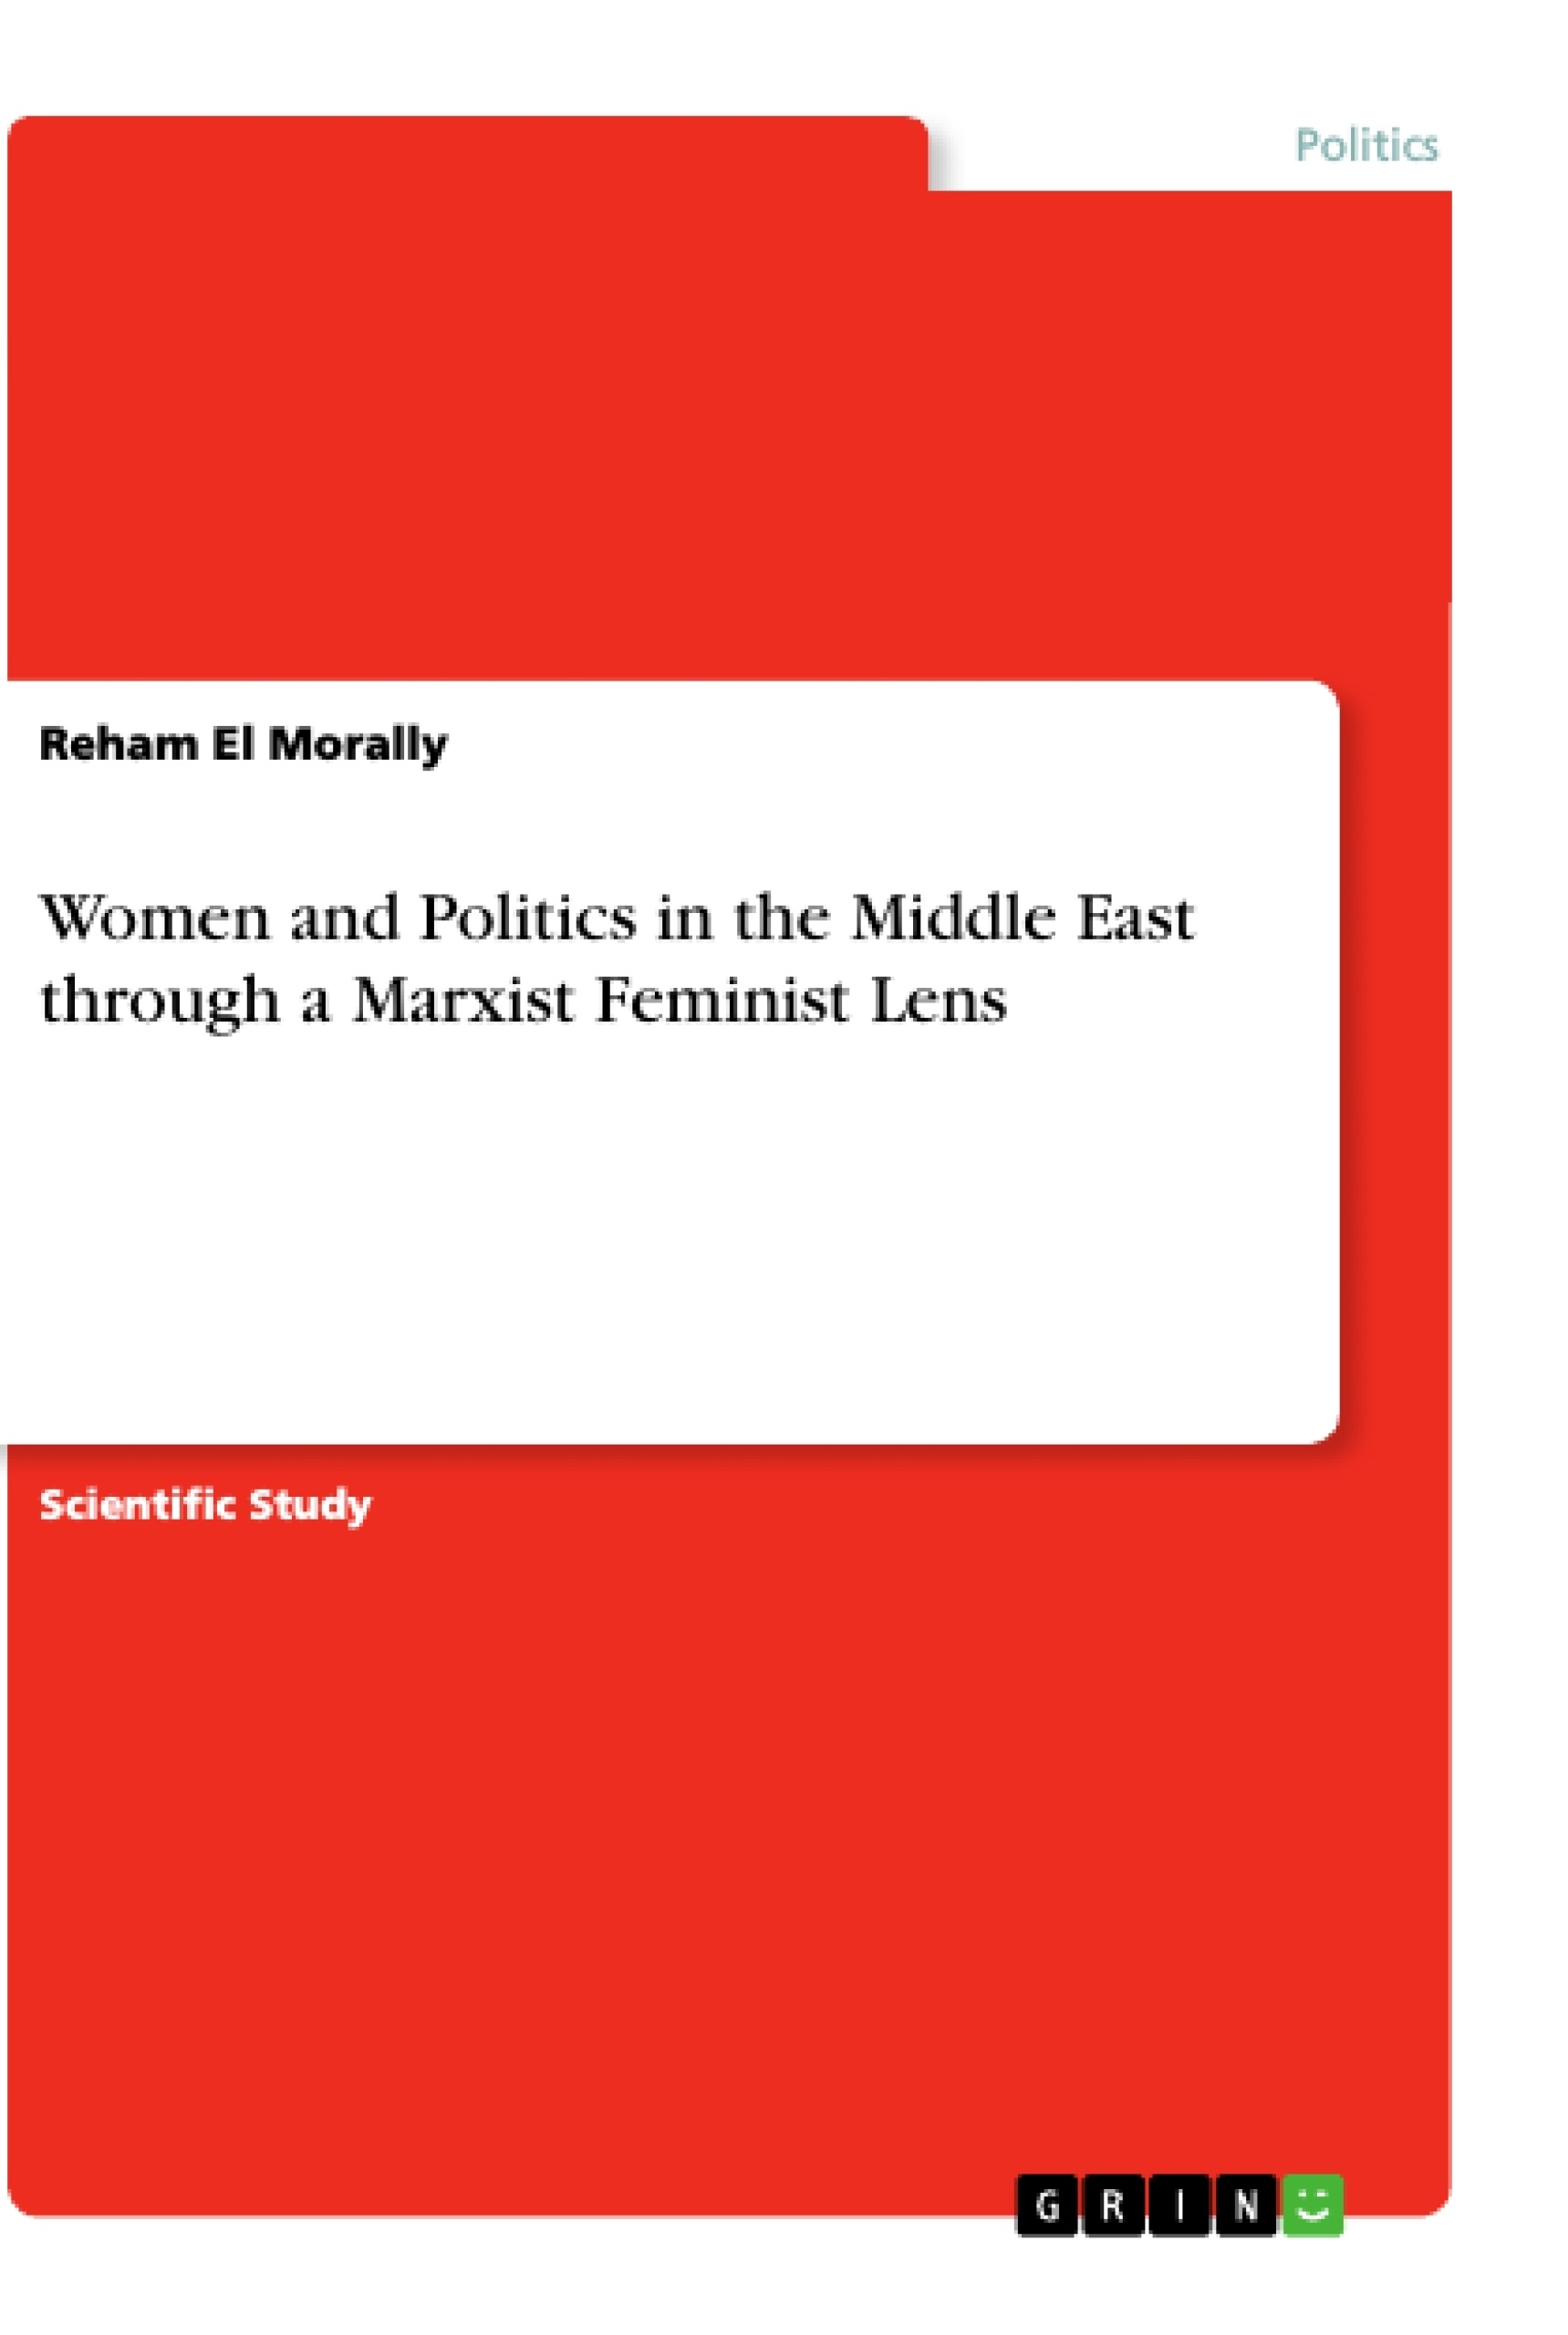 Titre: Women and Politics in the Middle East through a Marxist Feminist Lens